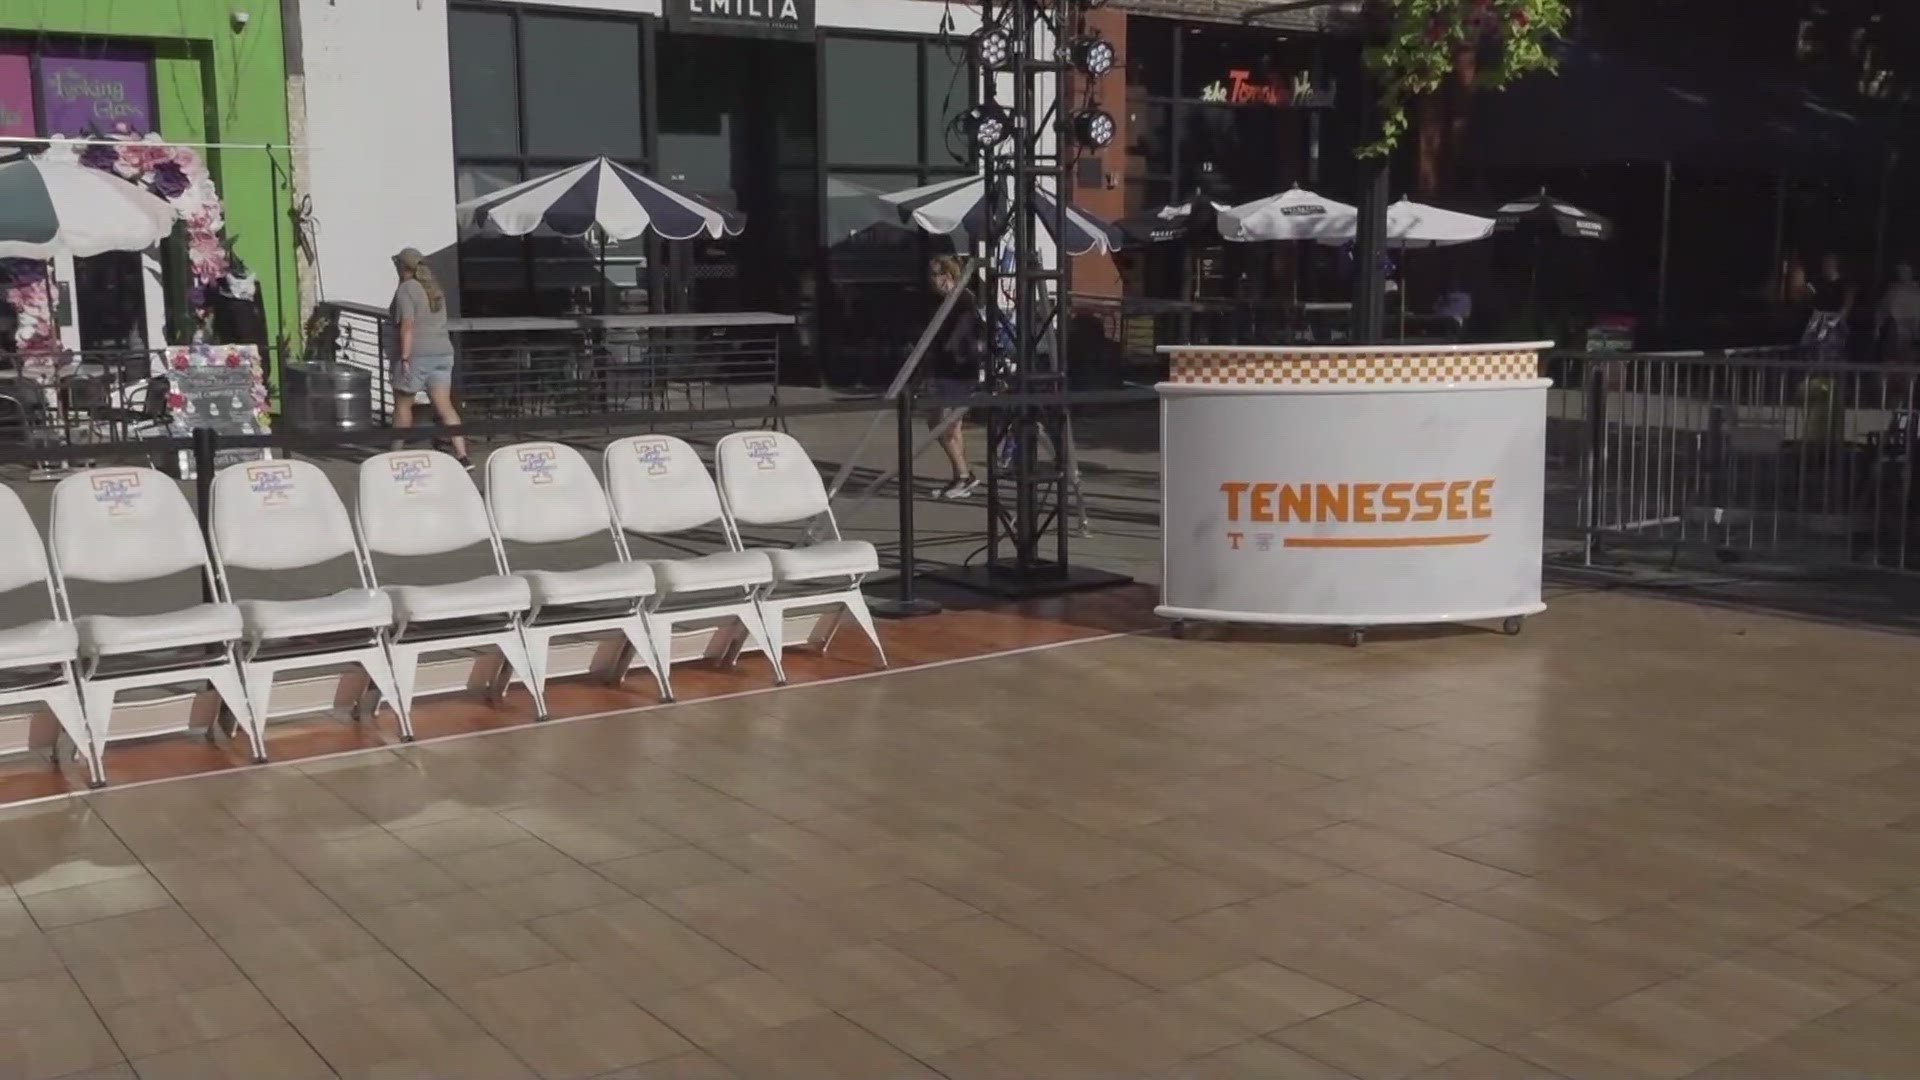 The Vols and Lady Vols will greet fans in Market Square this evening.